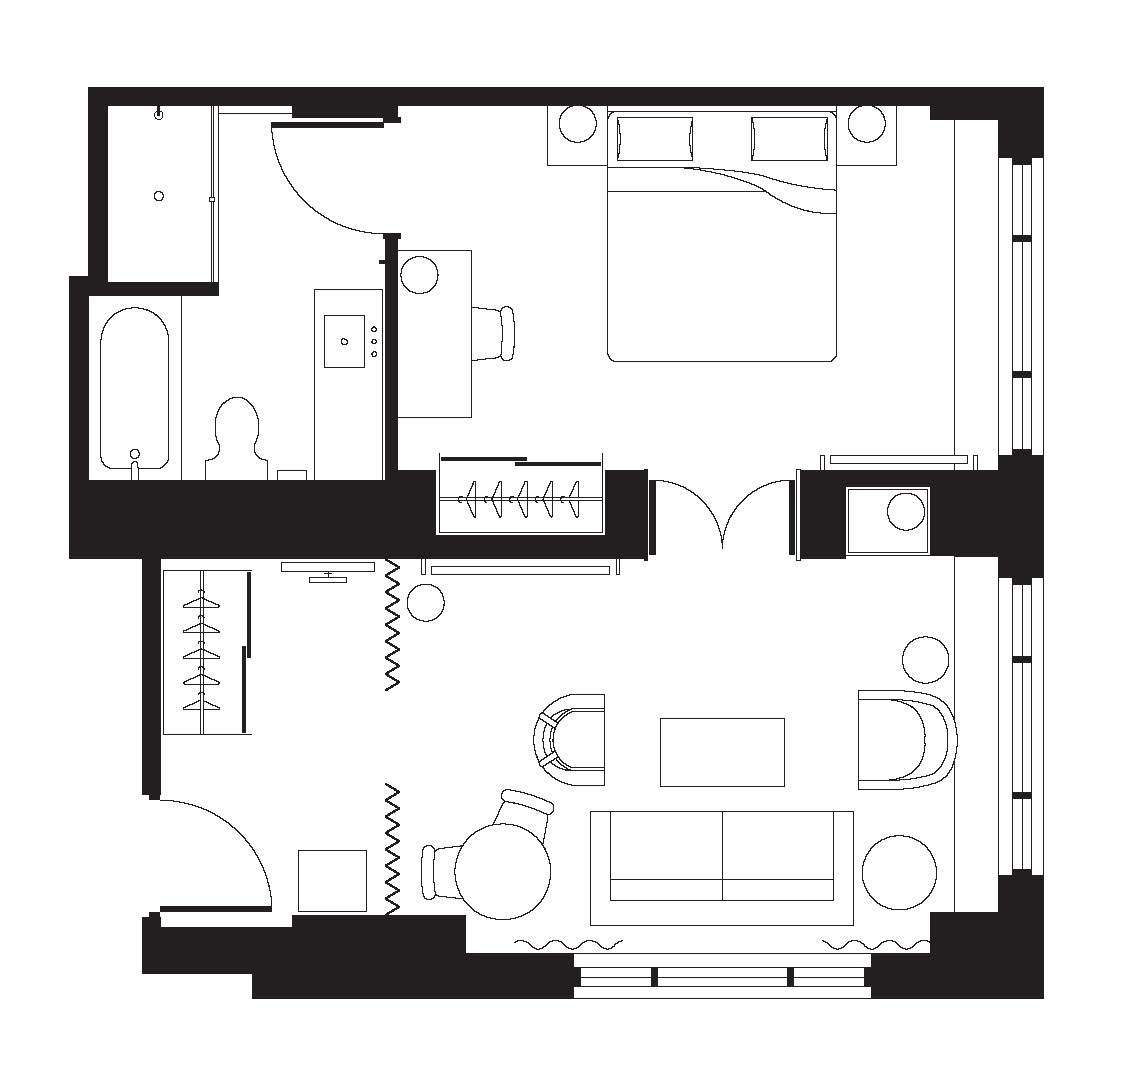 Floor plan of the Deluxe Suite at Soho Grand Hotel.